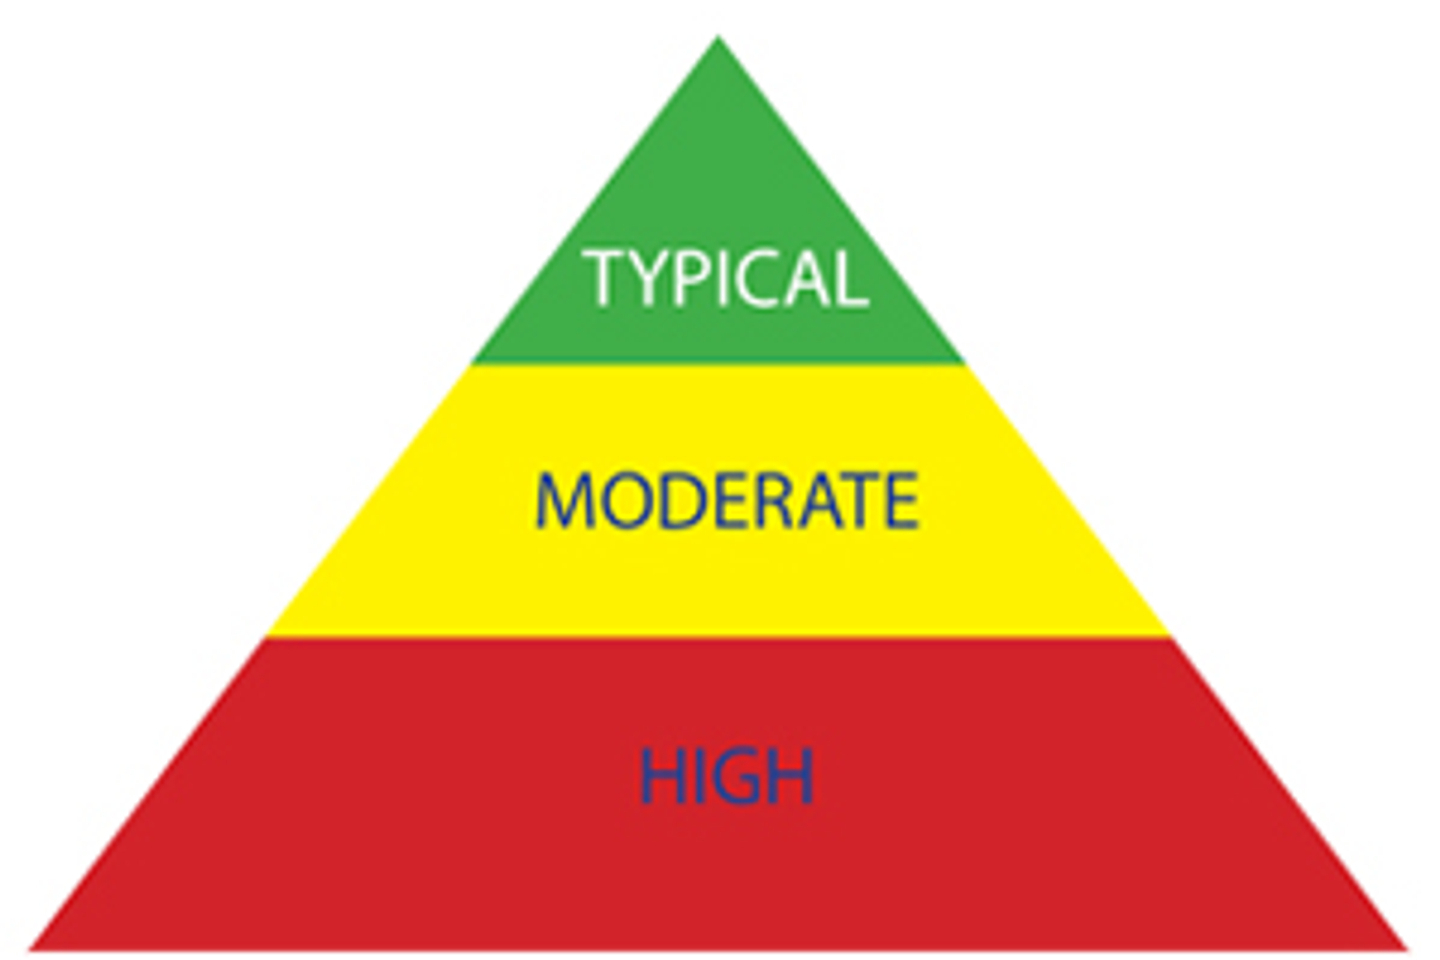 A tri-colored pyramid with three tiers of green, yellow, and red. Starting at the top and in ascending order, the pyramid has the text Typical, Moderate, and High.